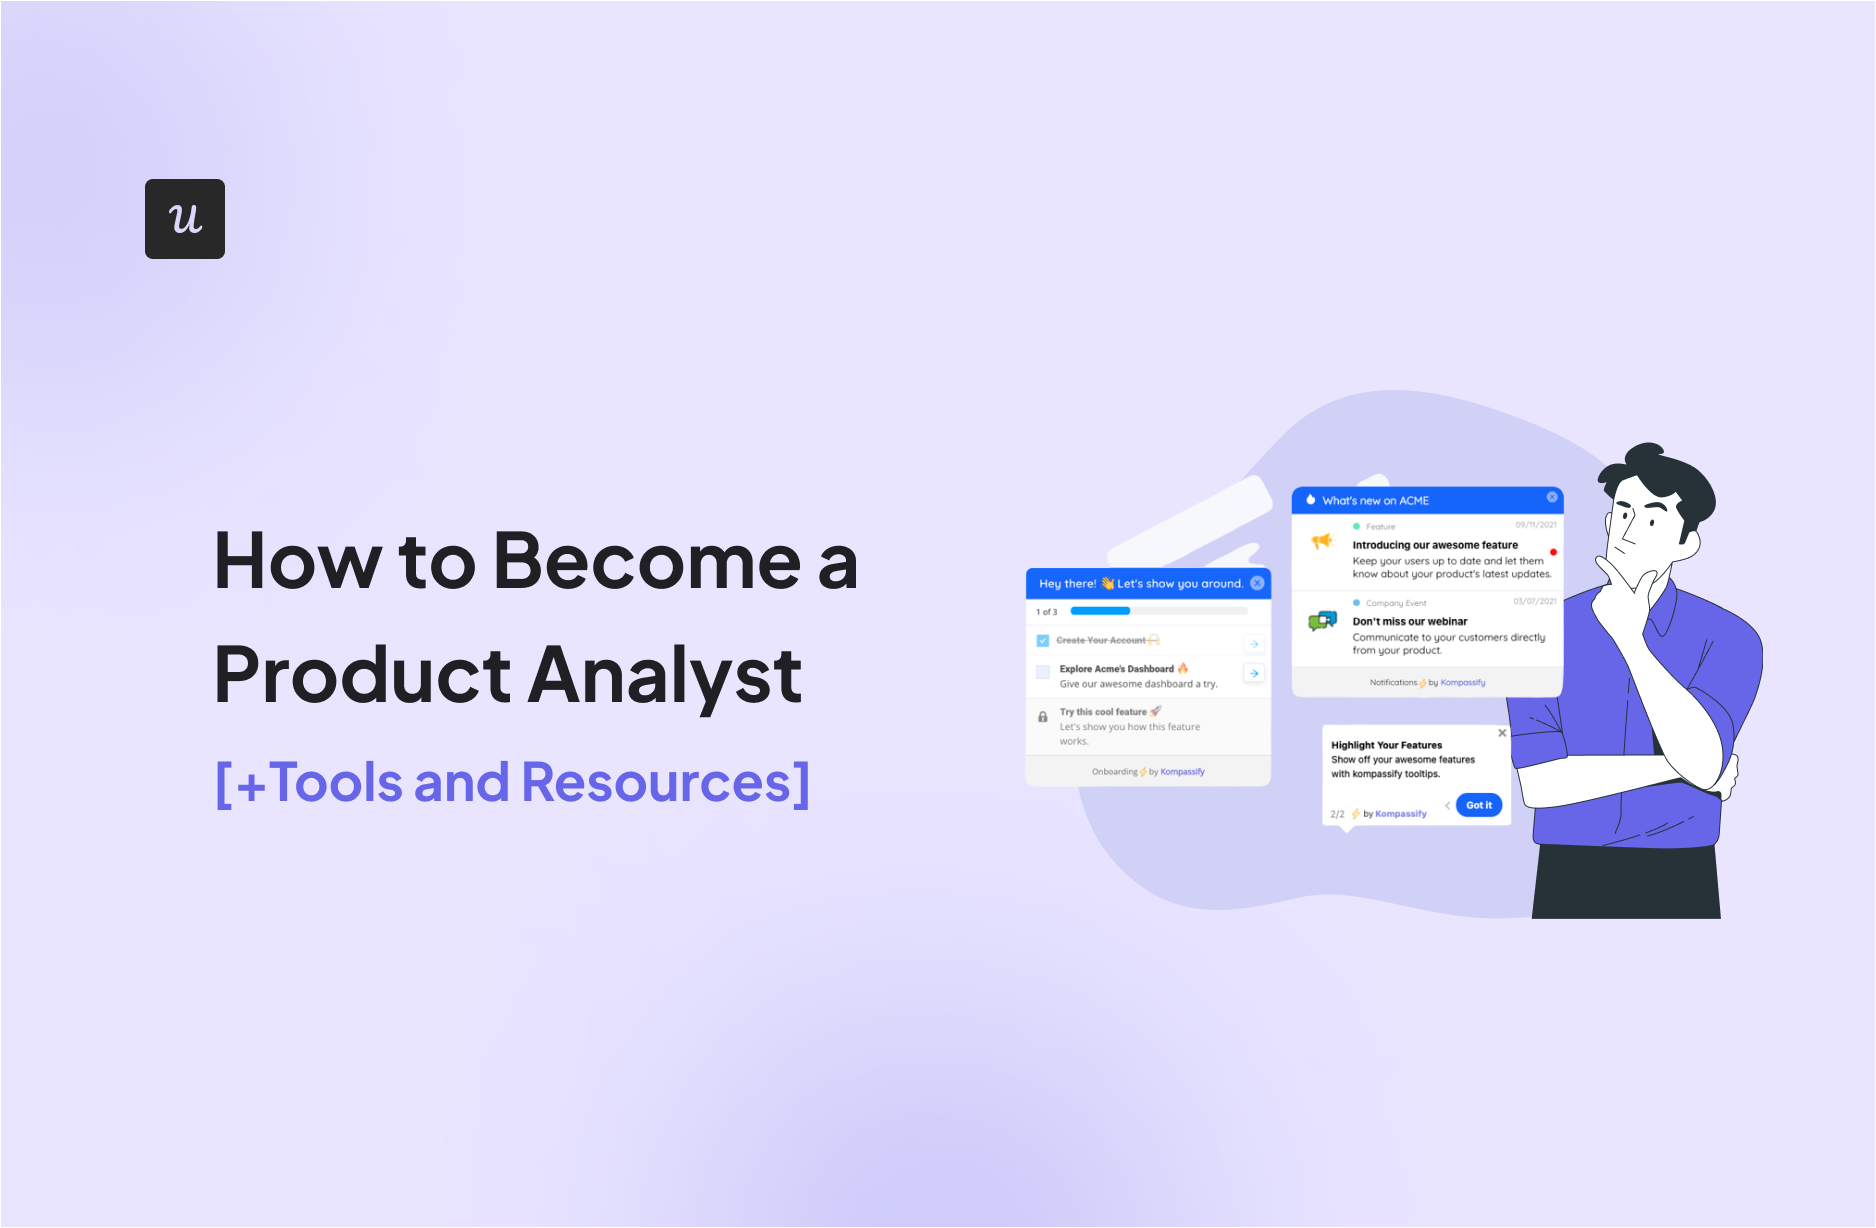 How to Become a Product Analyst [+Tools and Resources]